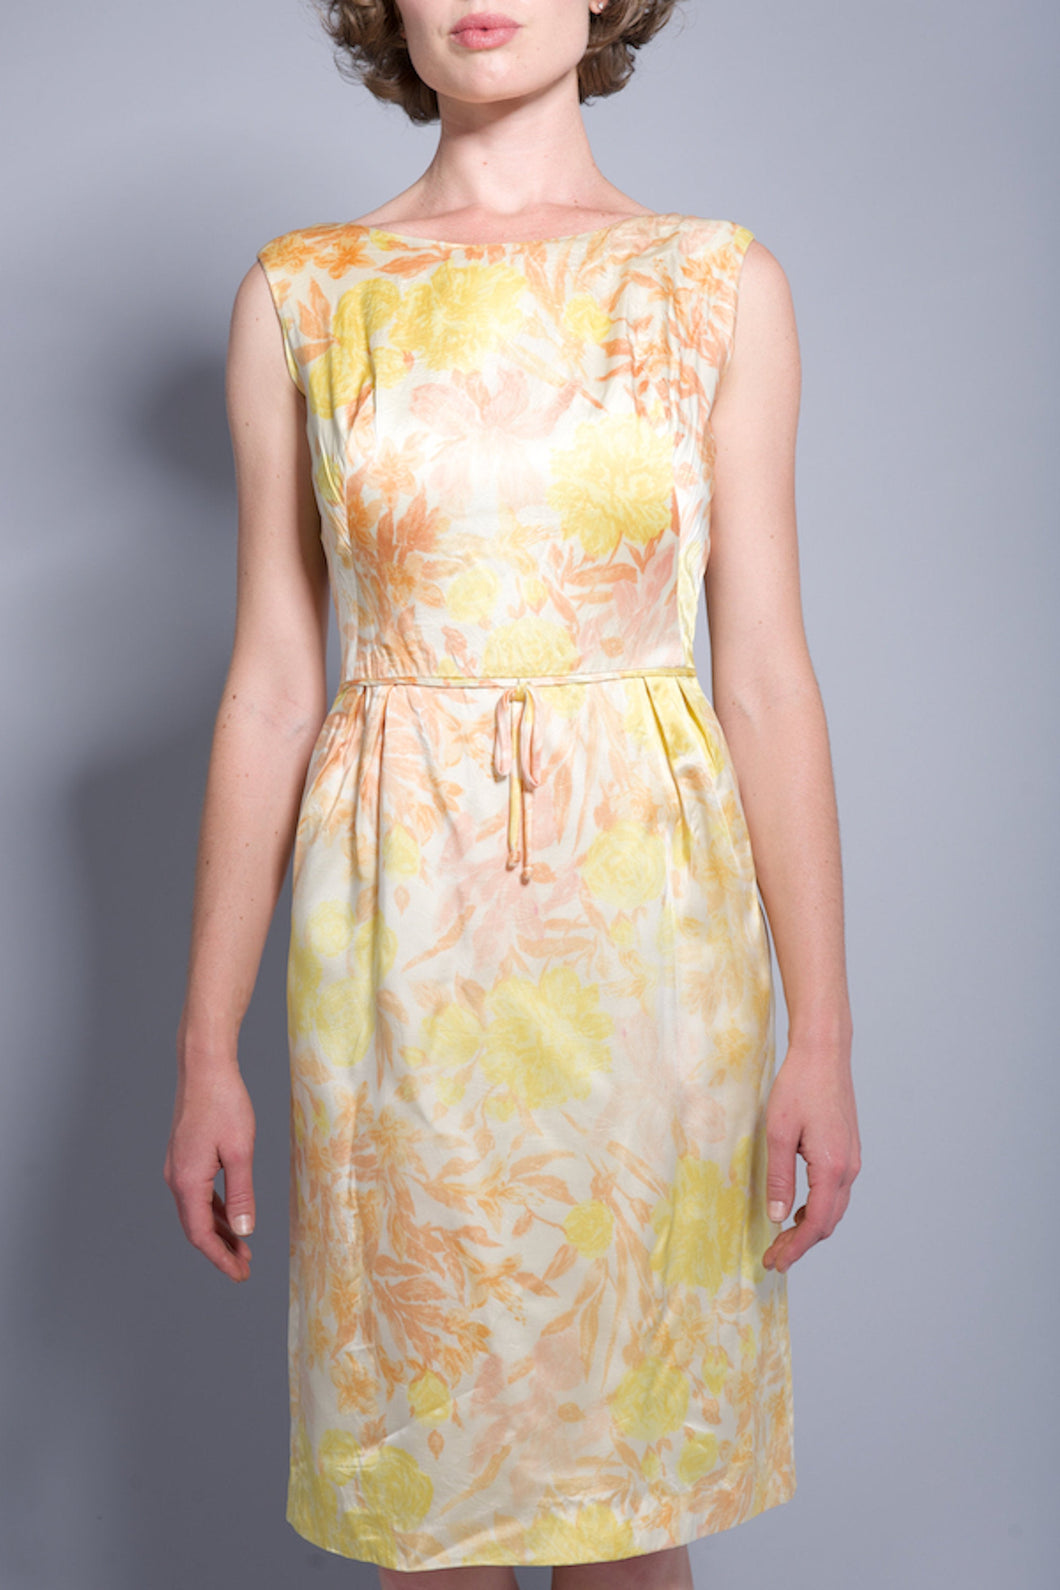 Vintage Yellow Peach Floral pastel Shift Dress Size 38 Small